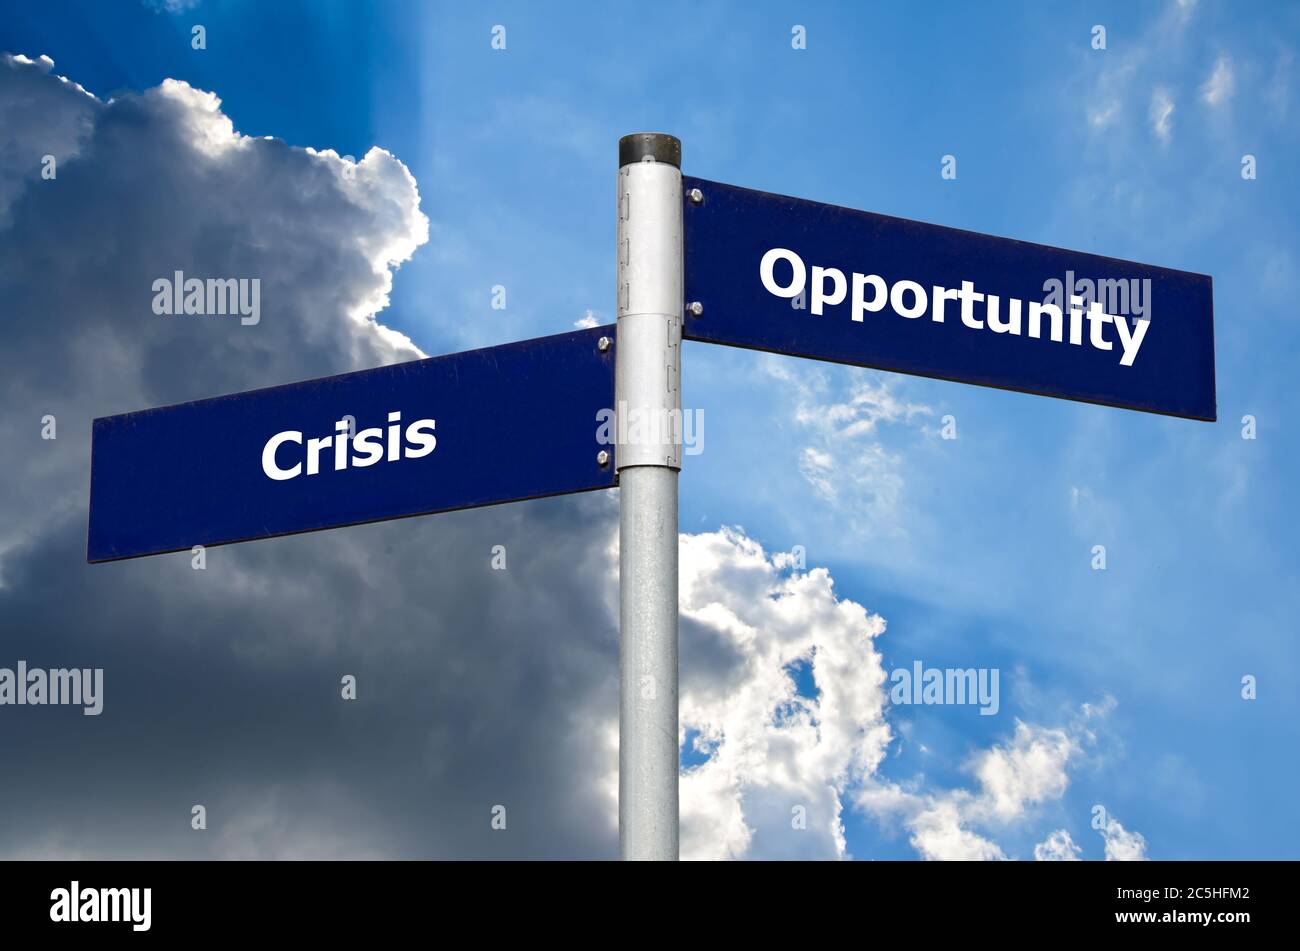 Street sign in front of dark clouds symbolizing contrast between 'crisis' and 'opportunity' Stock Photo